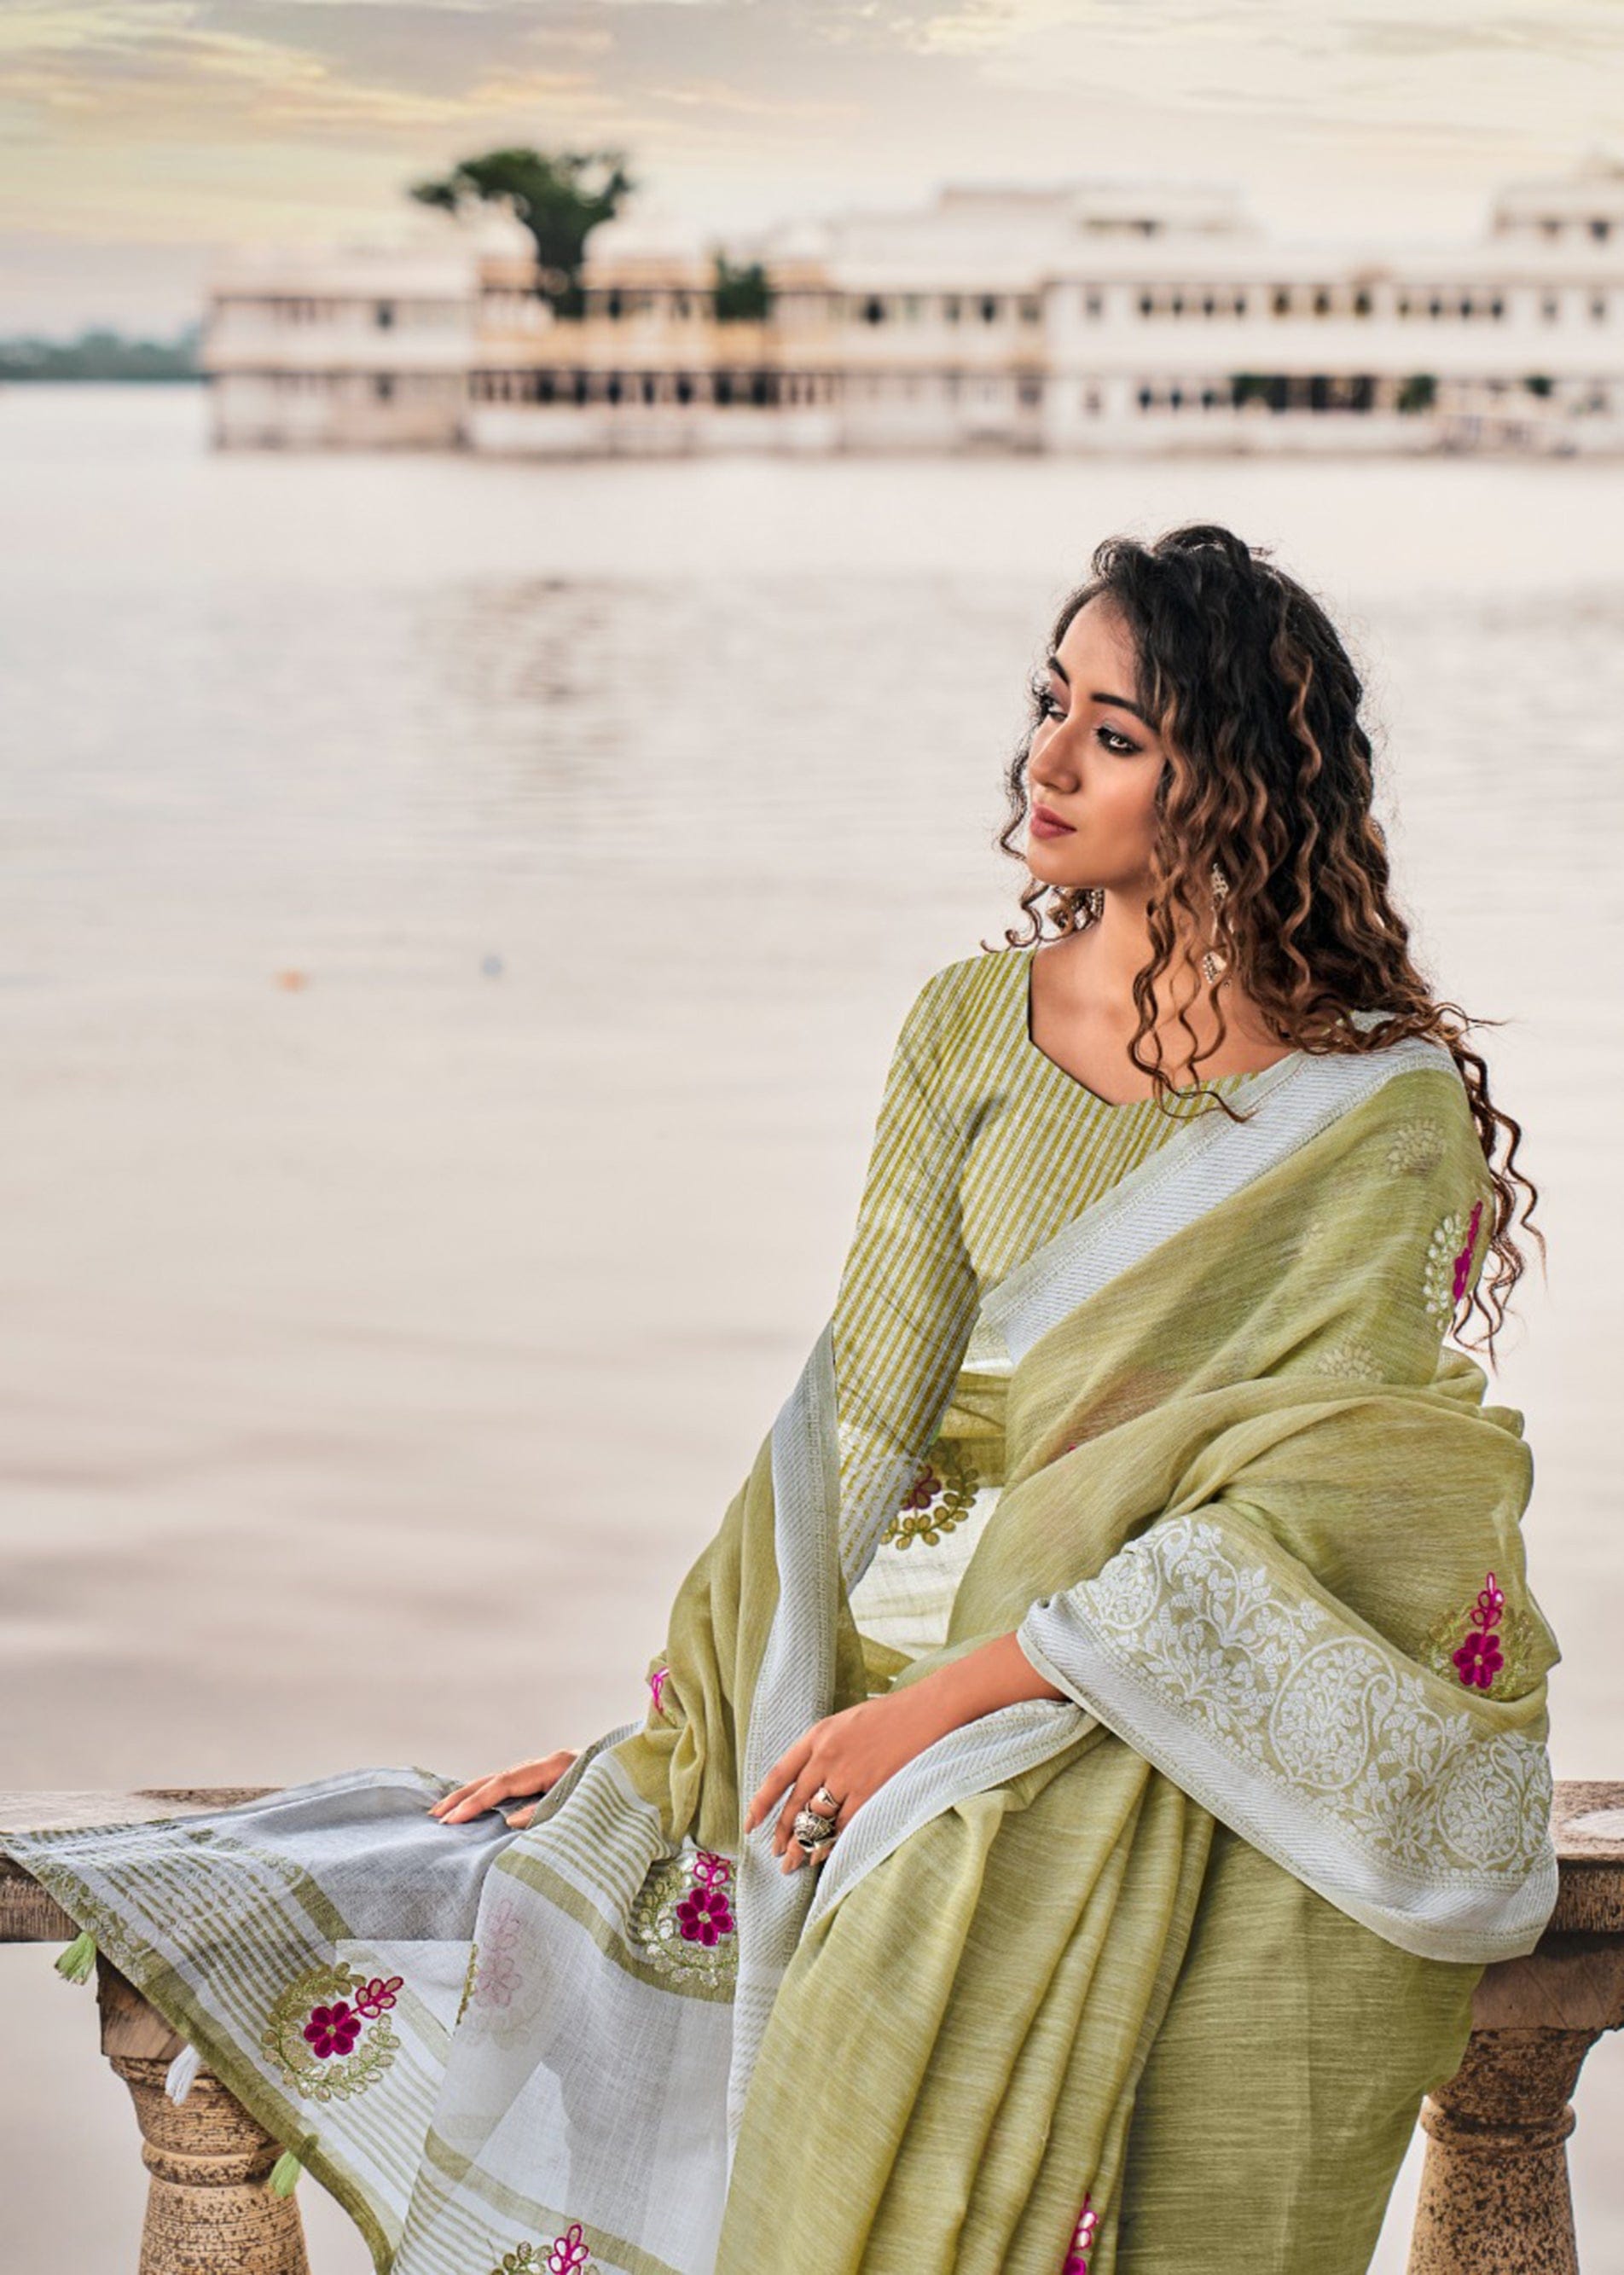 Handmade designer embroidered gota patti linen saree and blouse in hues of lime on white for online shopping made in India